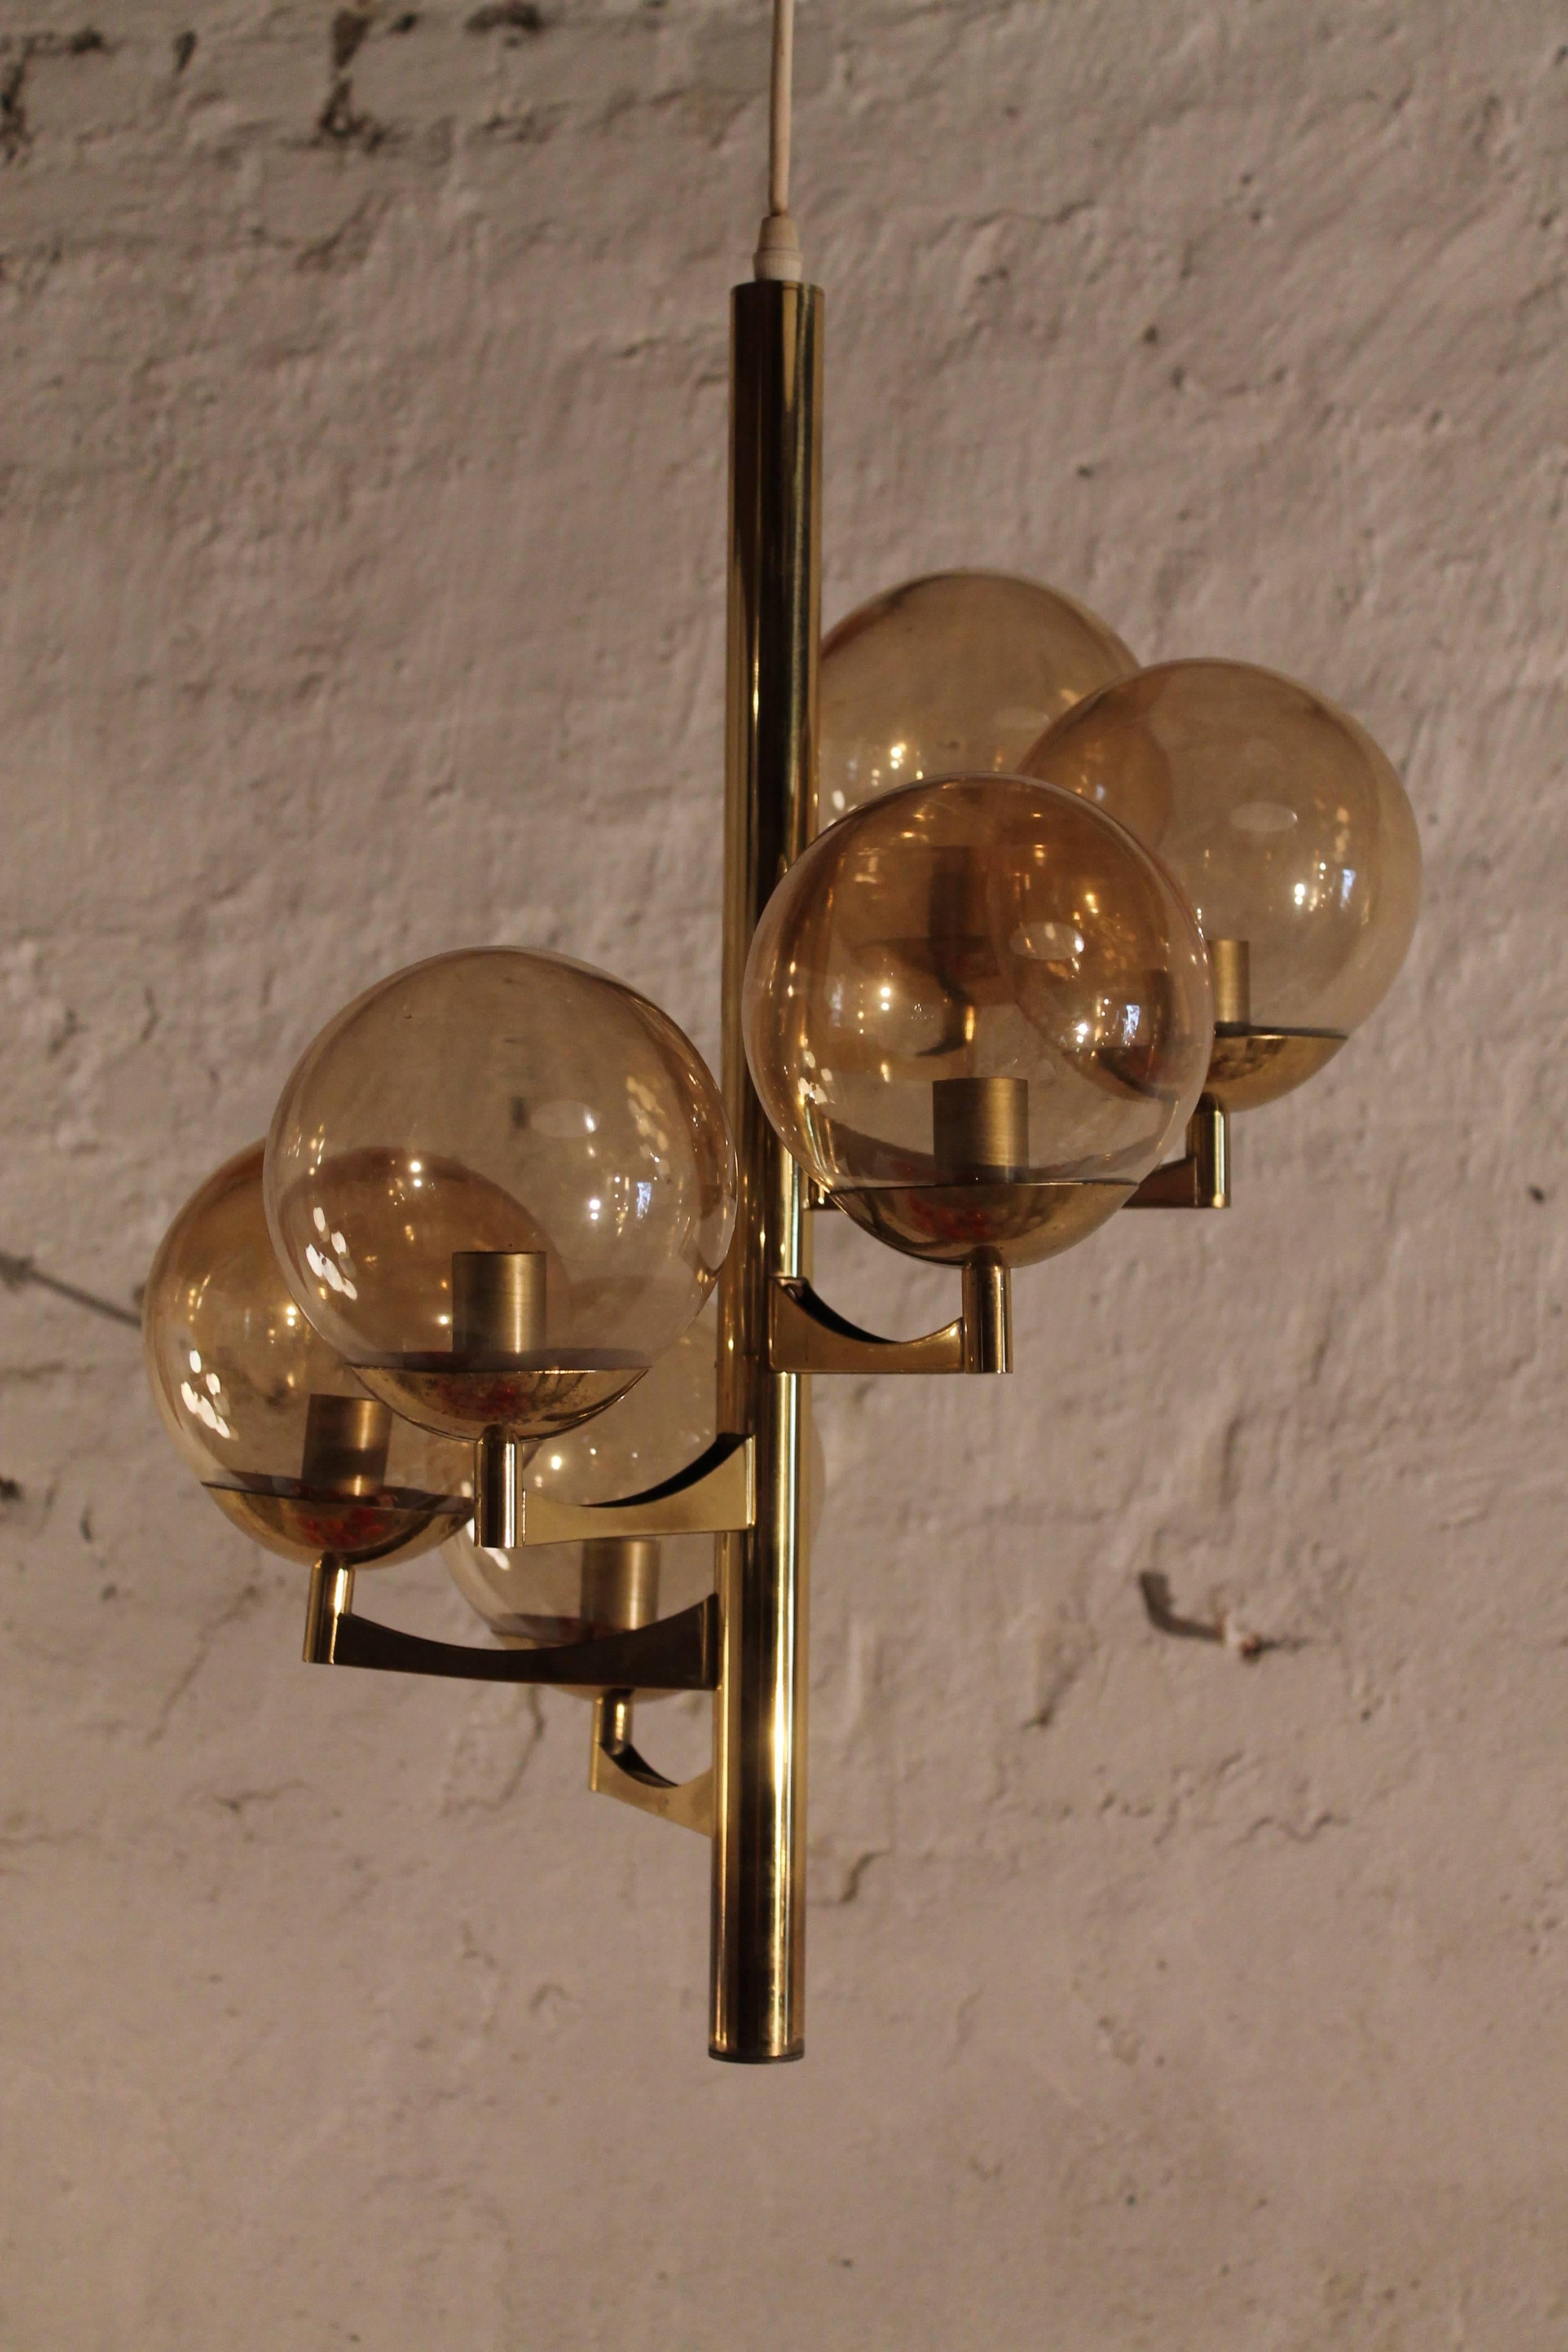 Glass ball chandelier by Hans-Agne Jacobsen, 1960s

Also wired for US use.